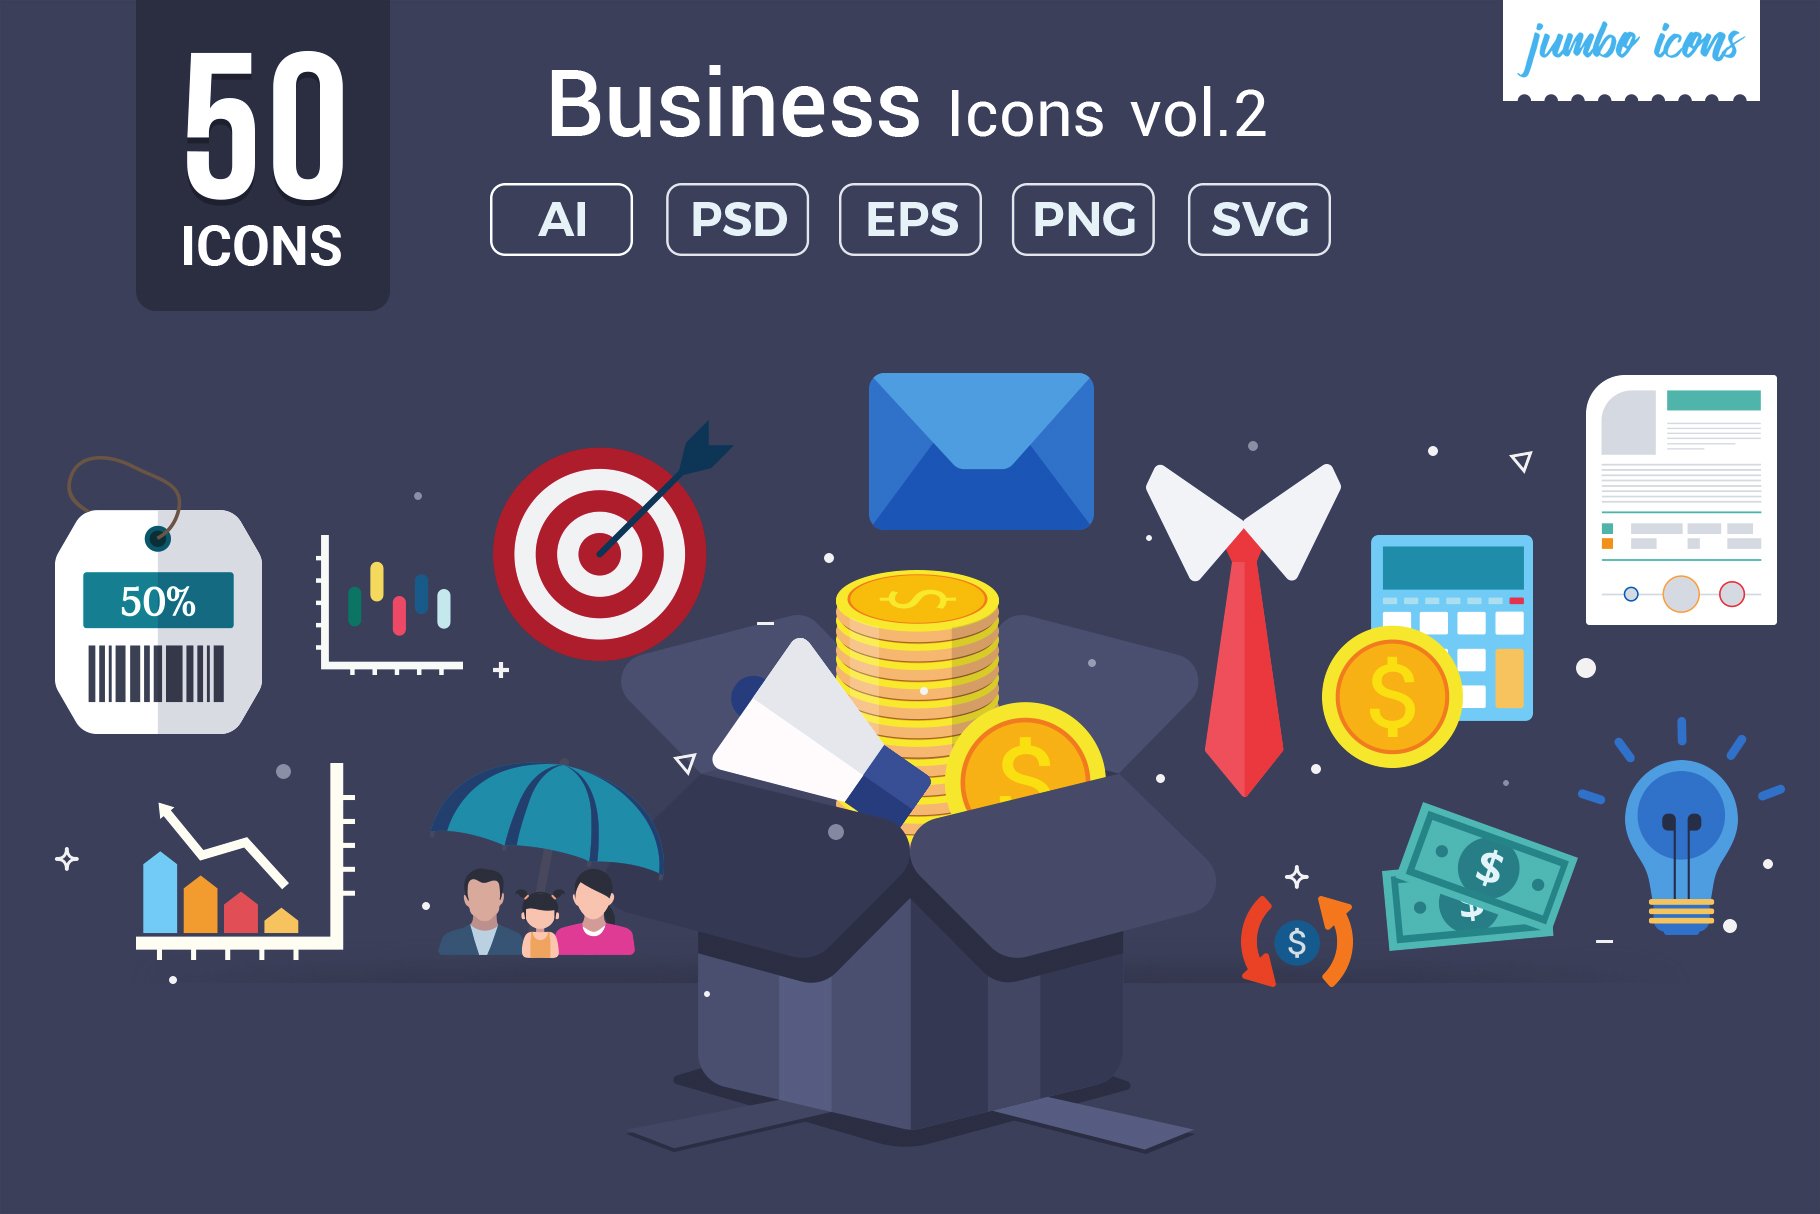 Business / Corporate Vector Icons V2 cover image.